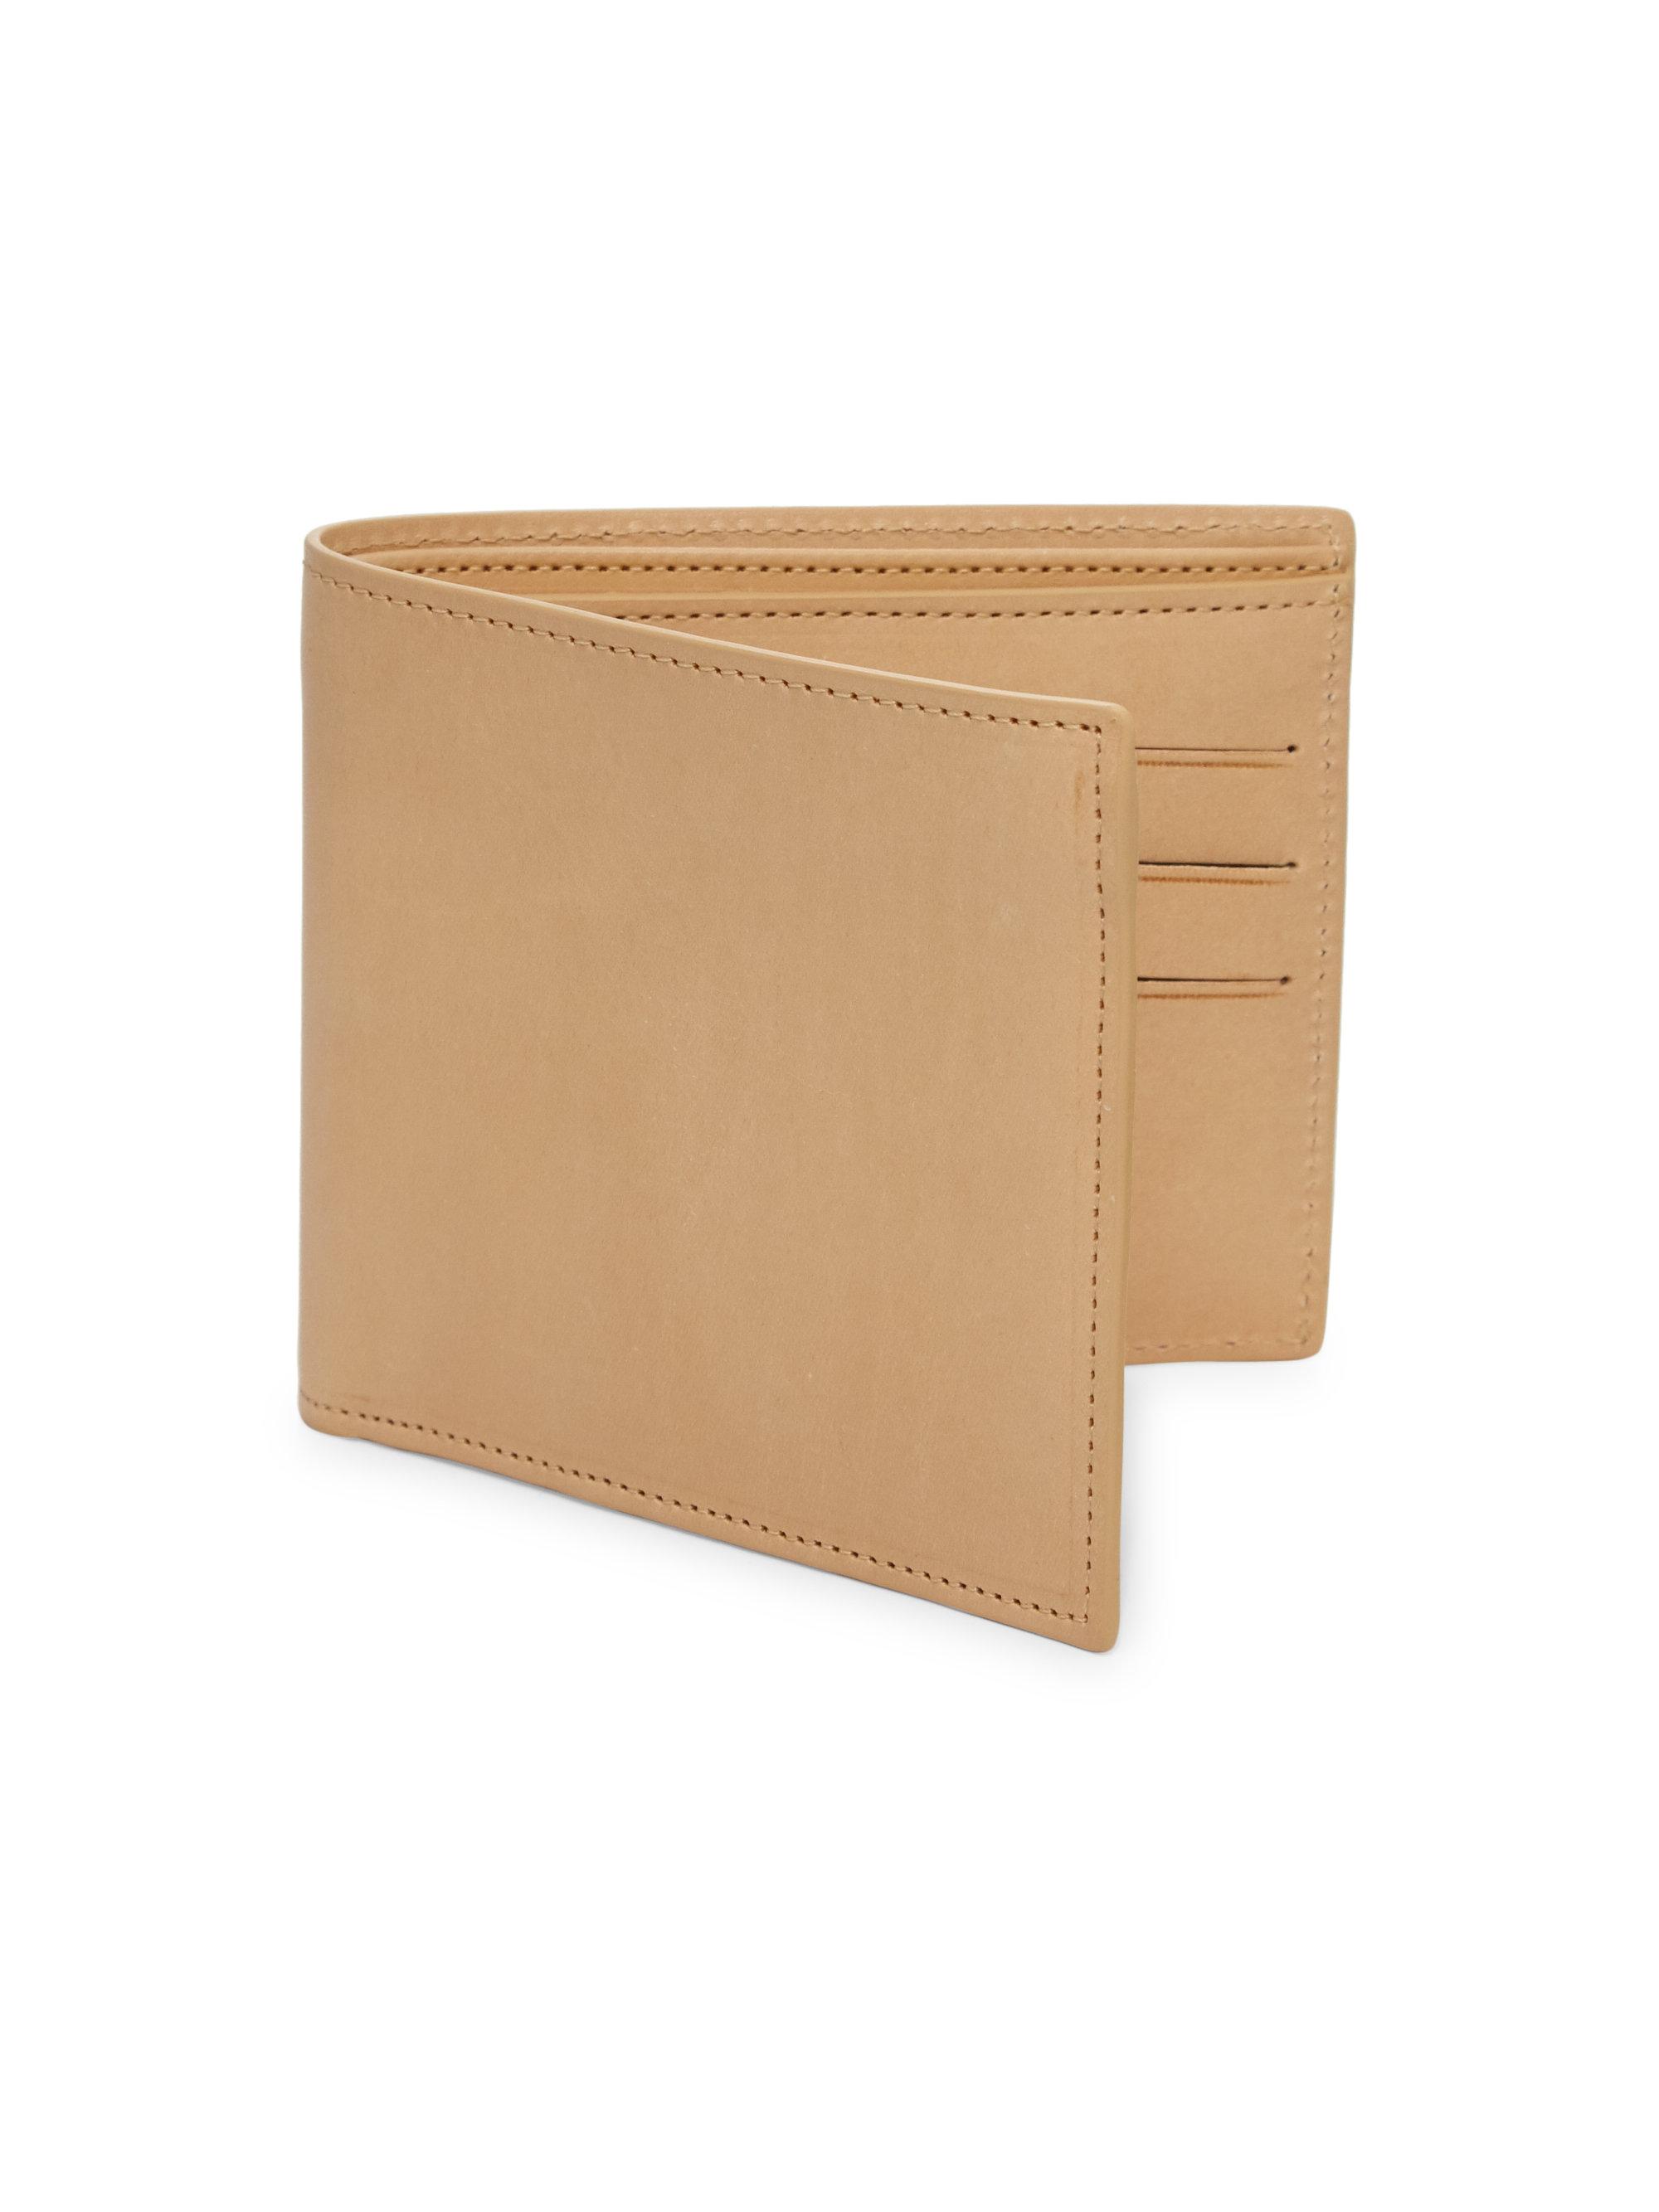 Lyst - Maison Margiela Stitched Leather Bifold Wallet in Natural for Men